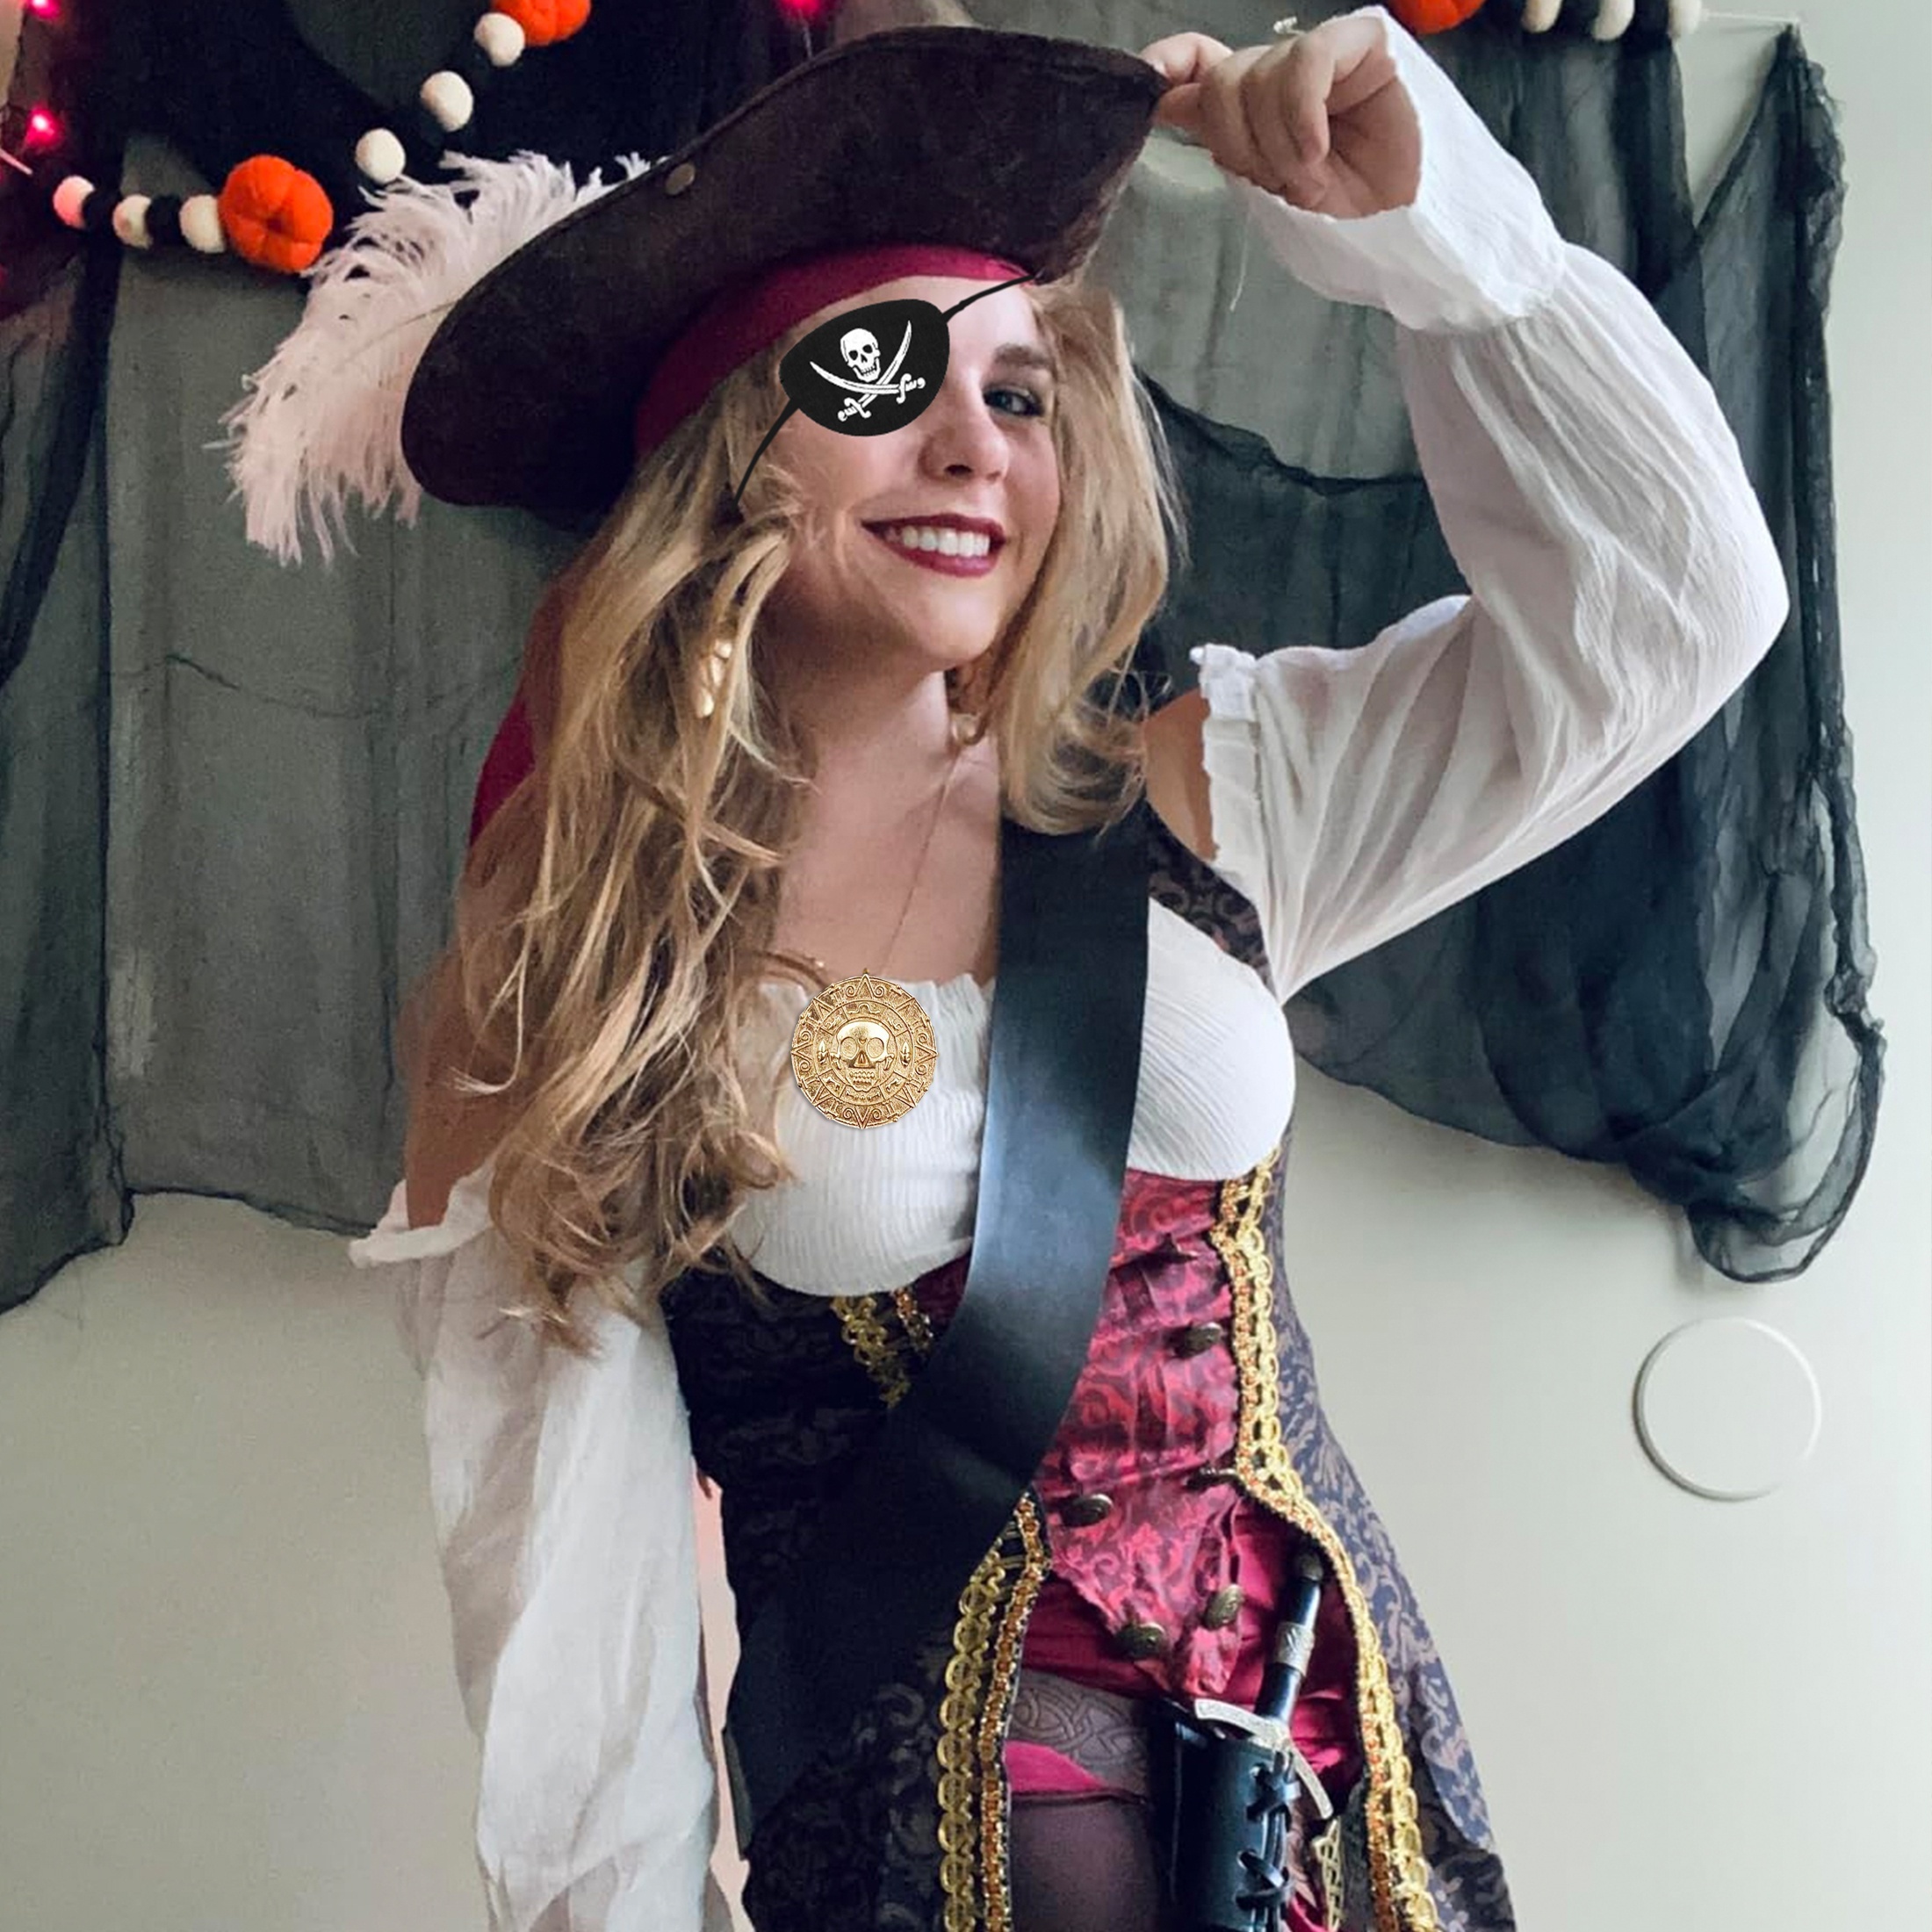 Pink Magenta and Black Stripes Pirate Witch Goth Costume Striped